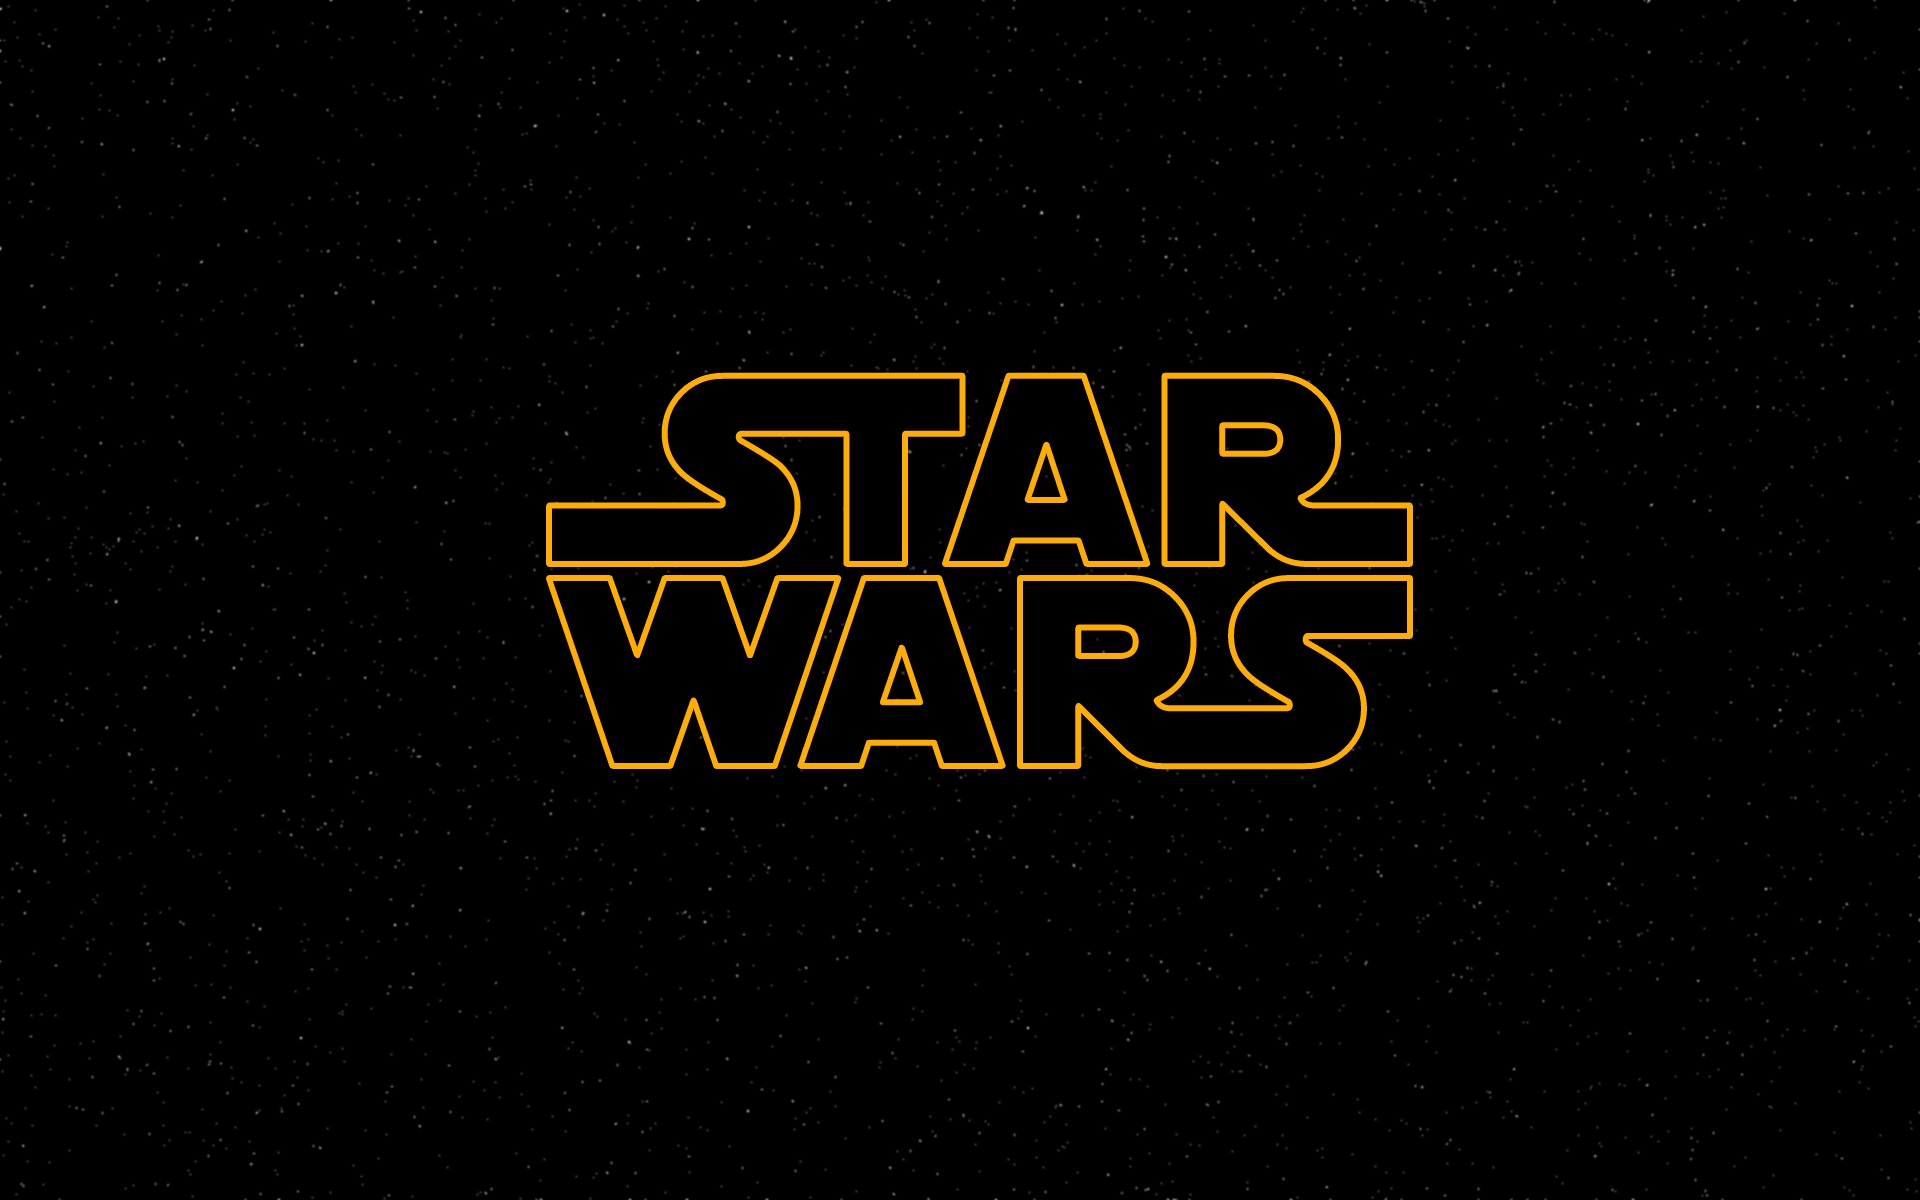 Star Wars Logo Wallpaper Share This Awesome